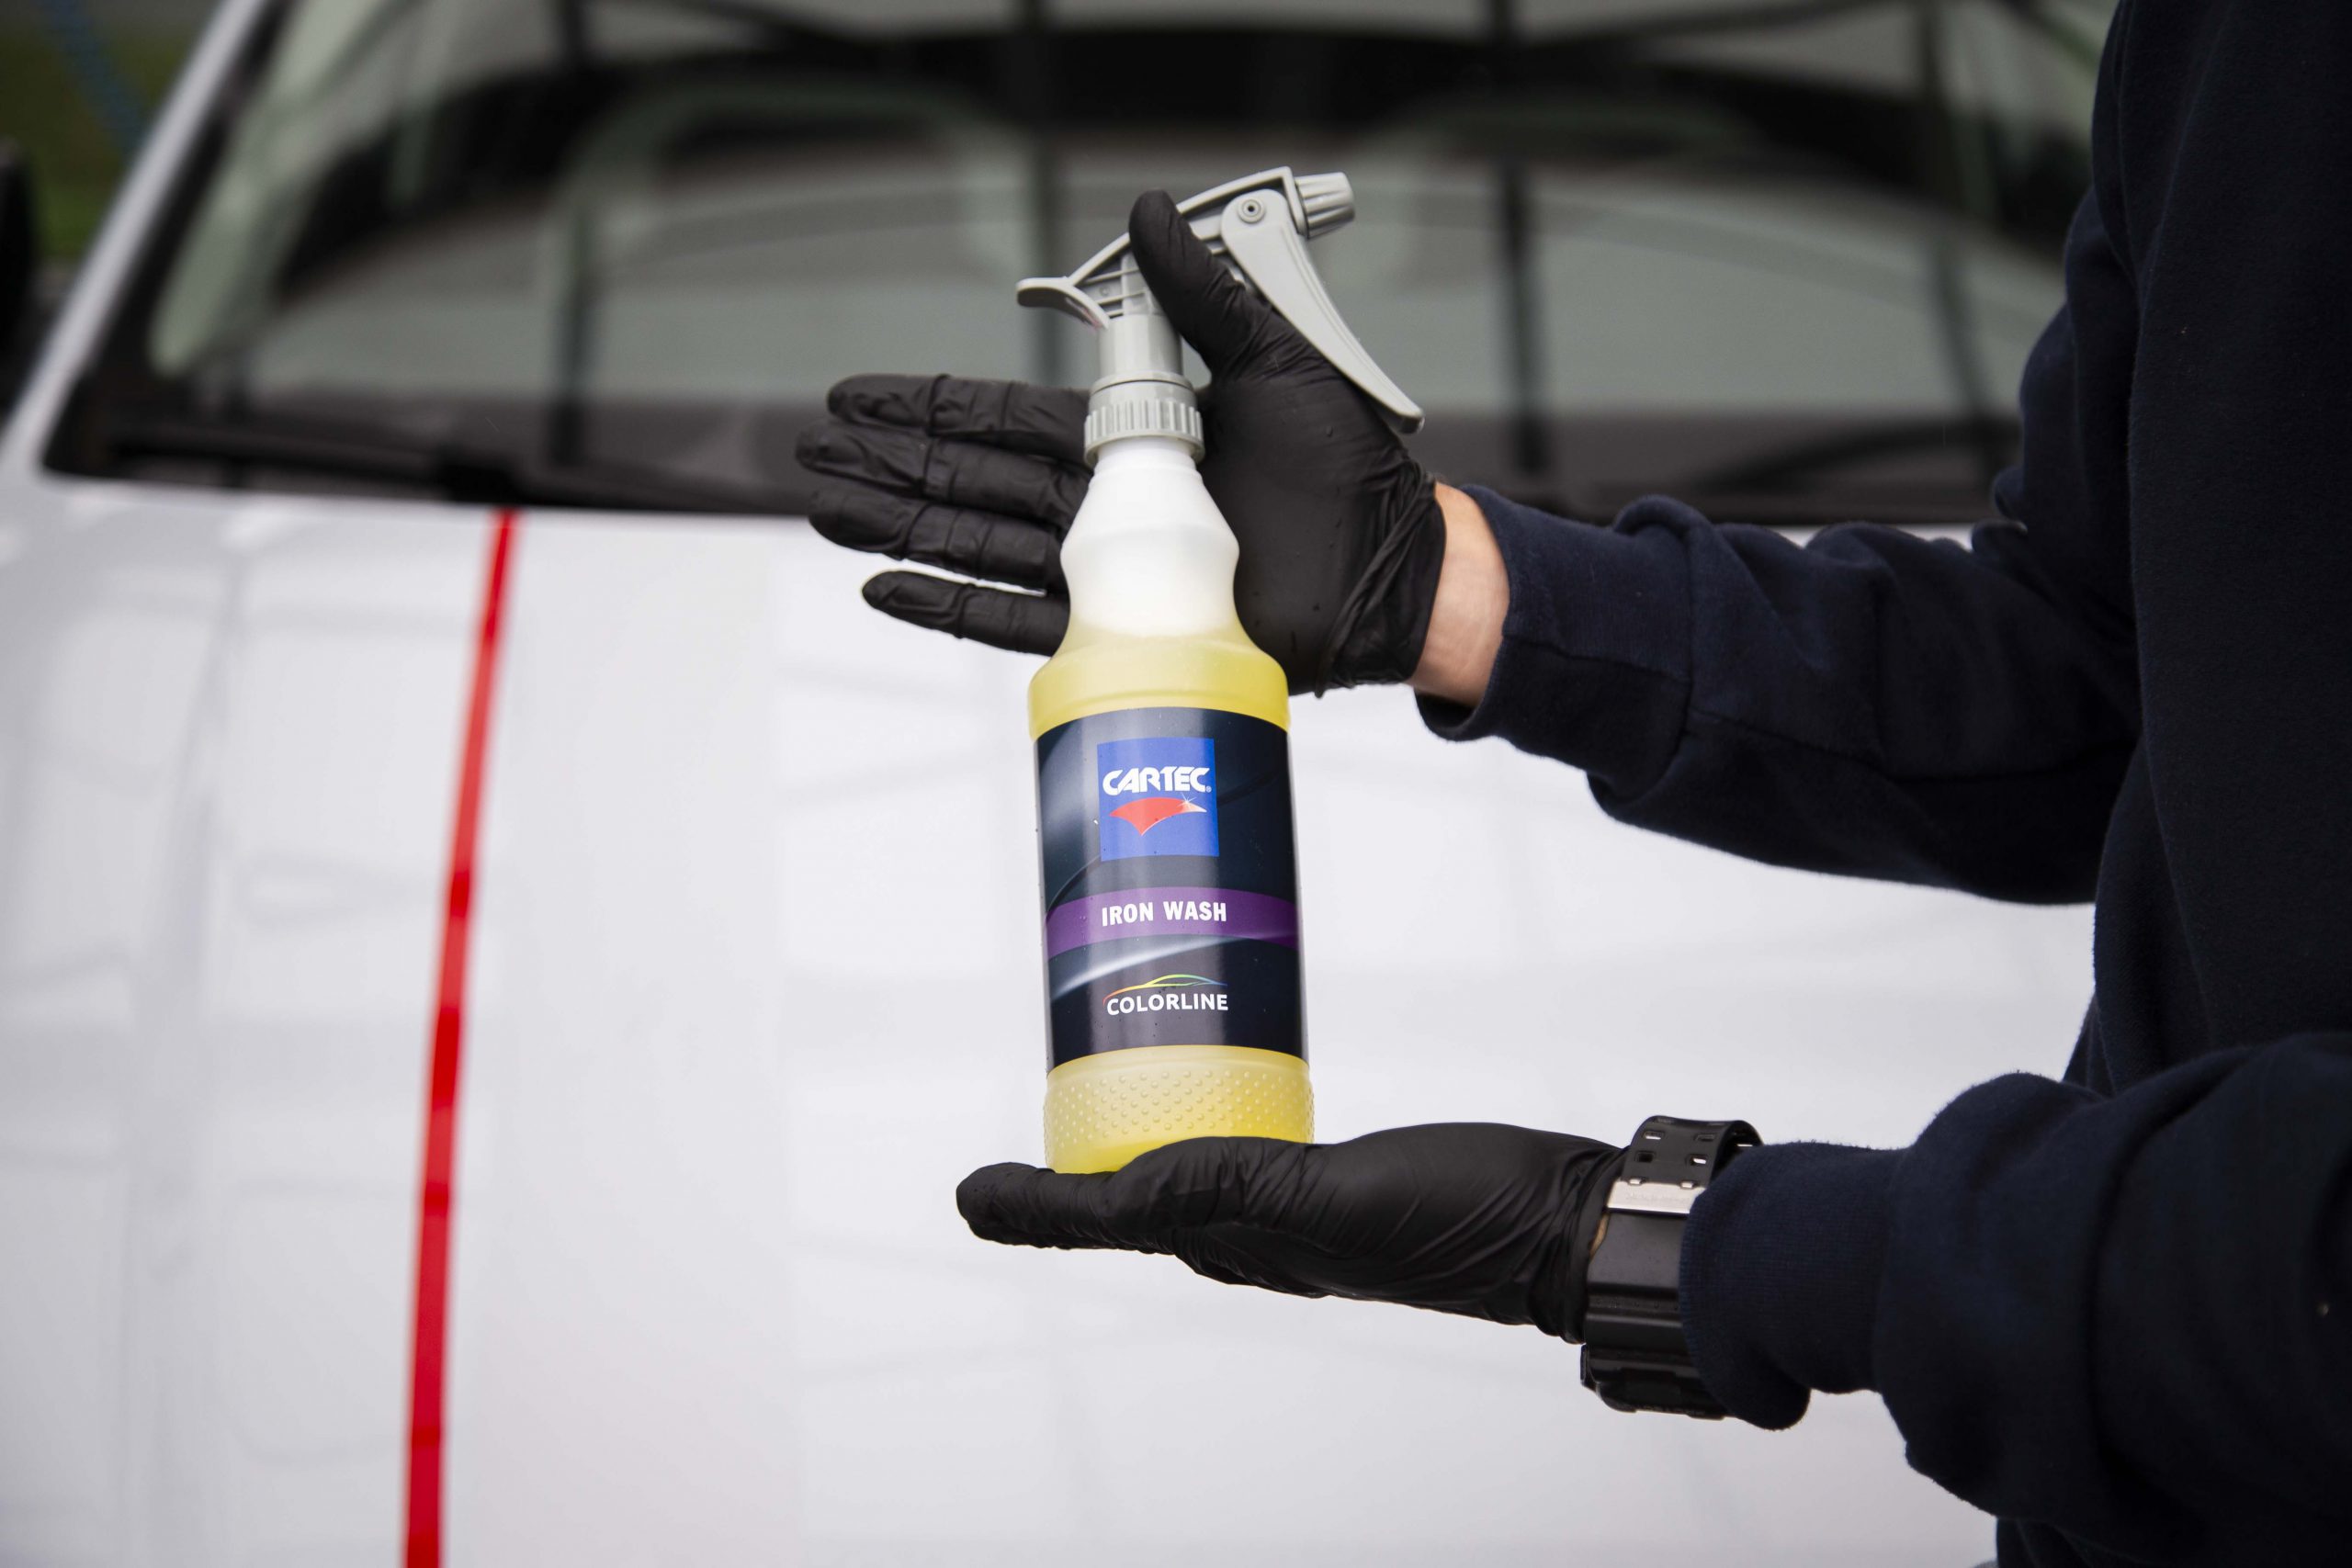 Car exterior cleaning with the Essentials - Cartec World